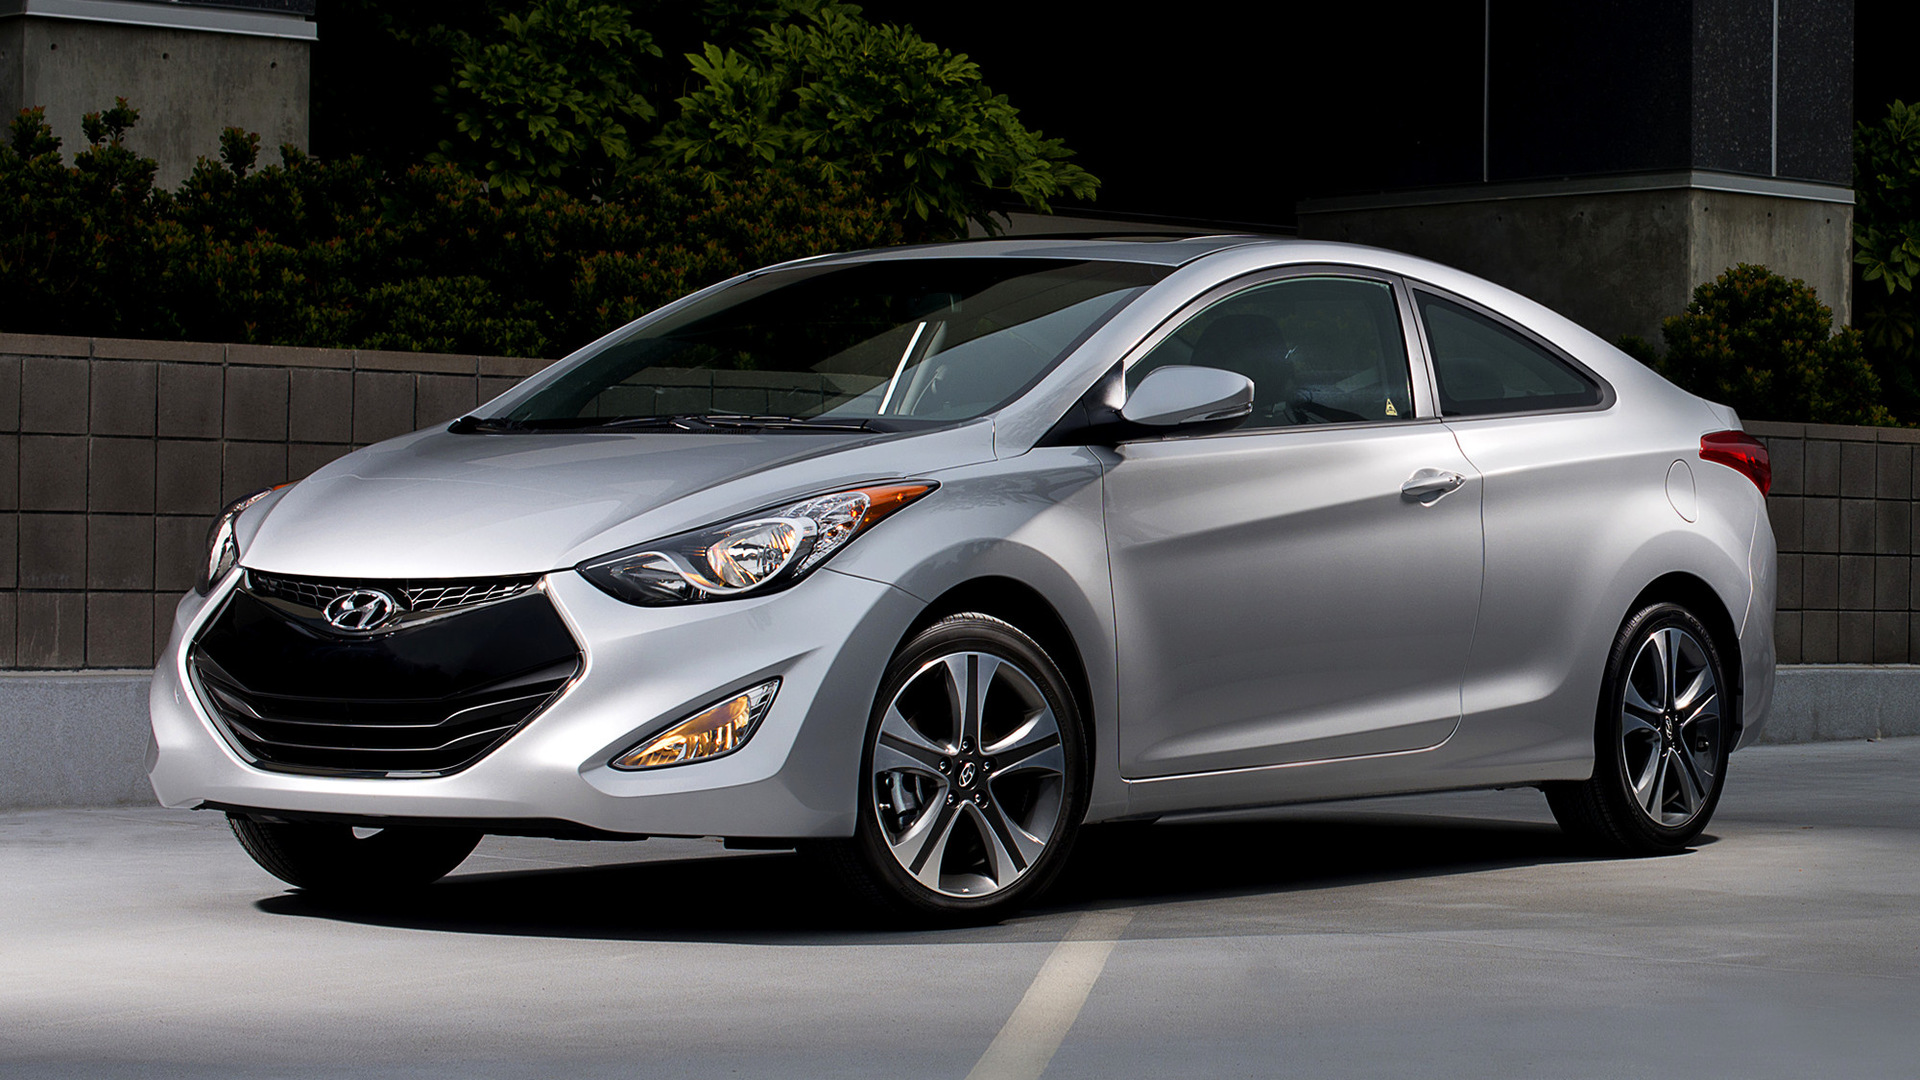 60+ Hyundai Elantra HD Wallpapers and Backgrounds